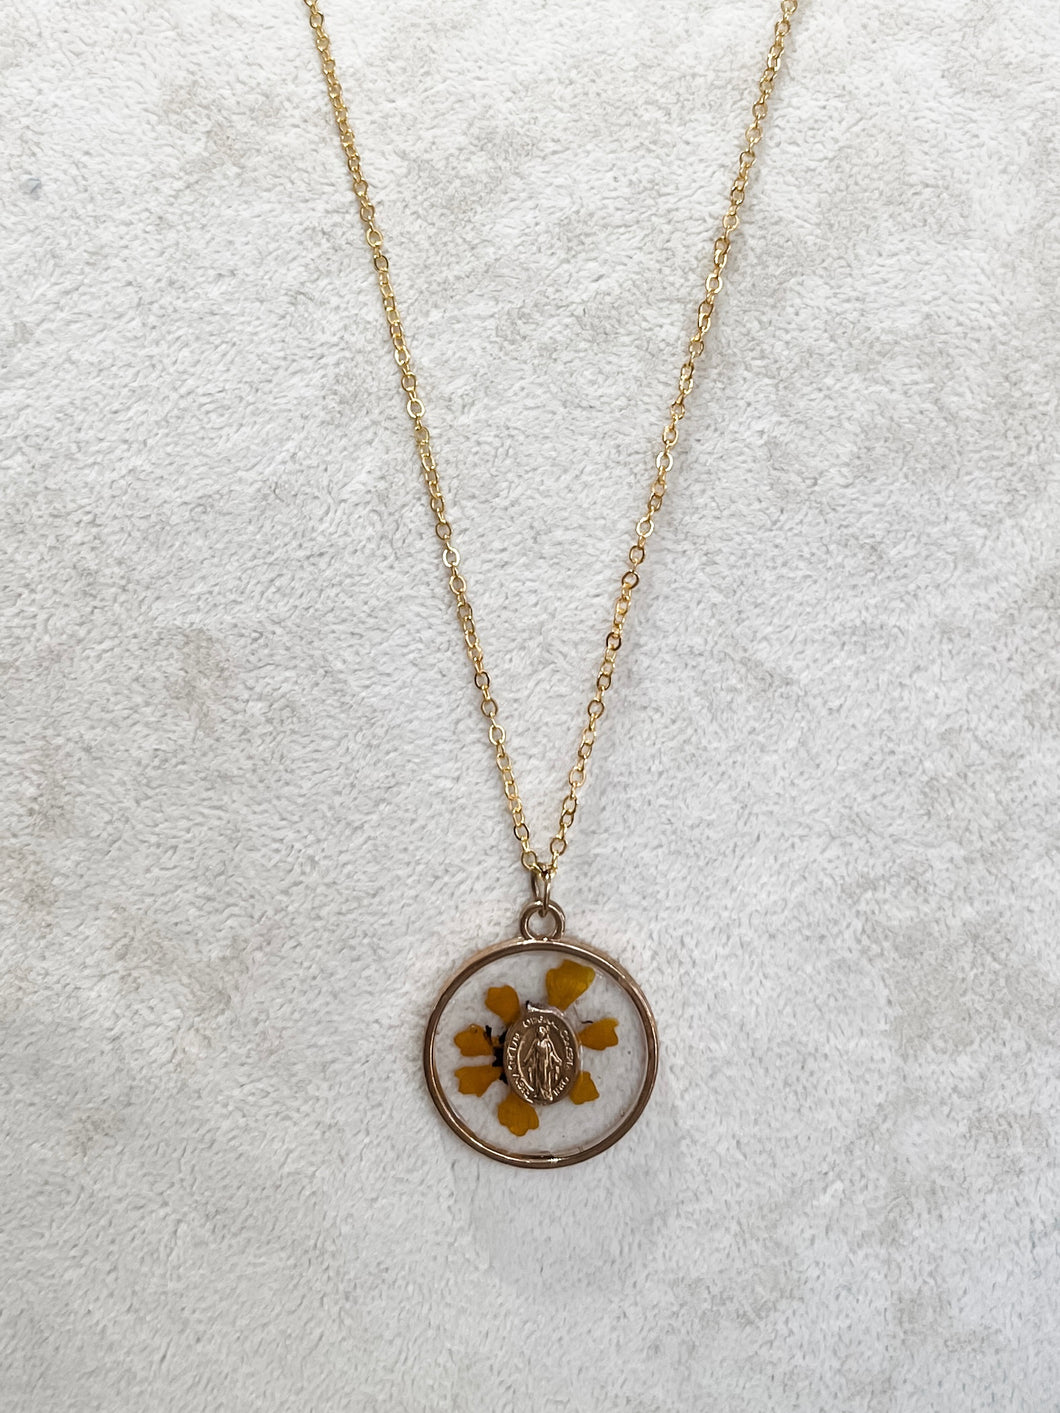 Gold Round Mary with Yellow Flower-Prairie Press Designs